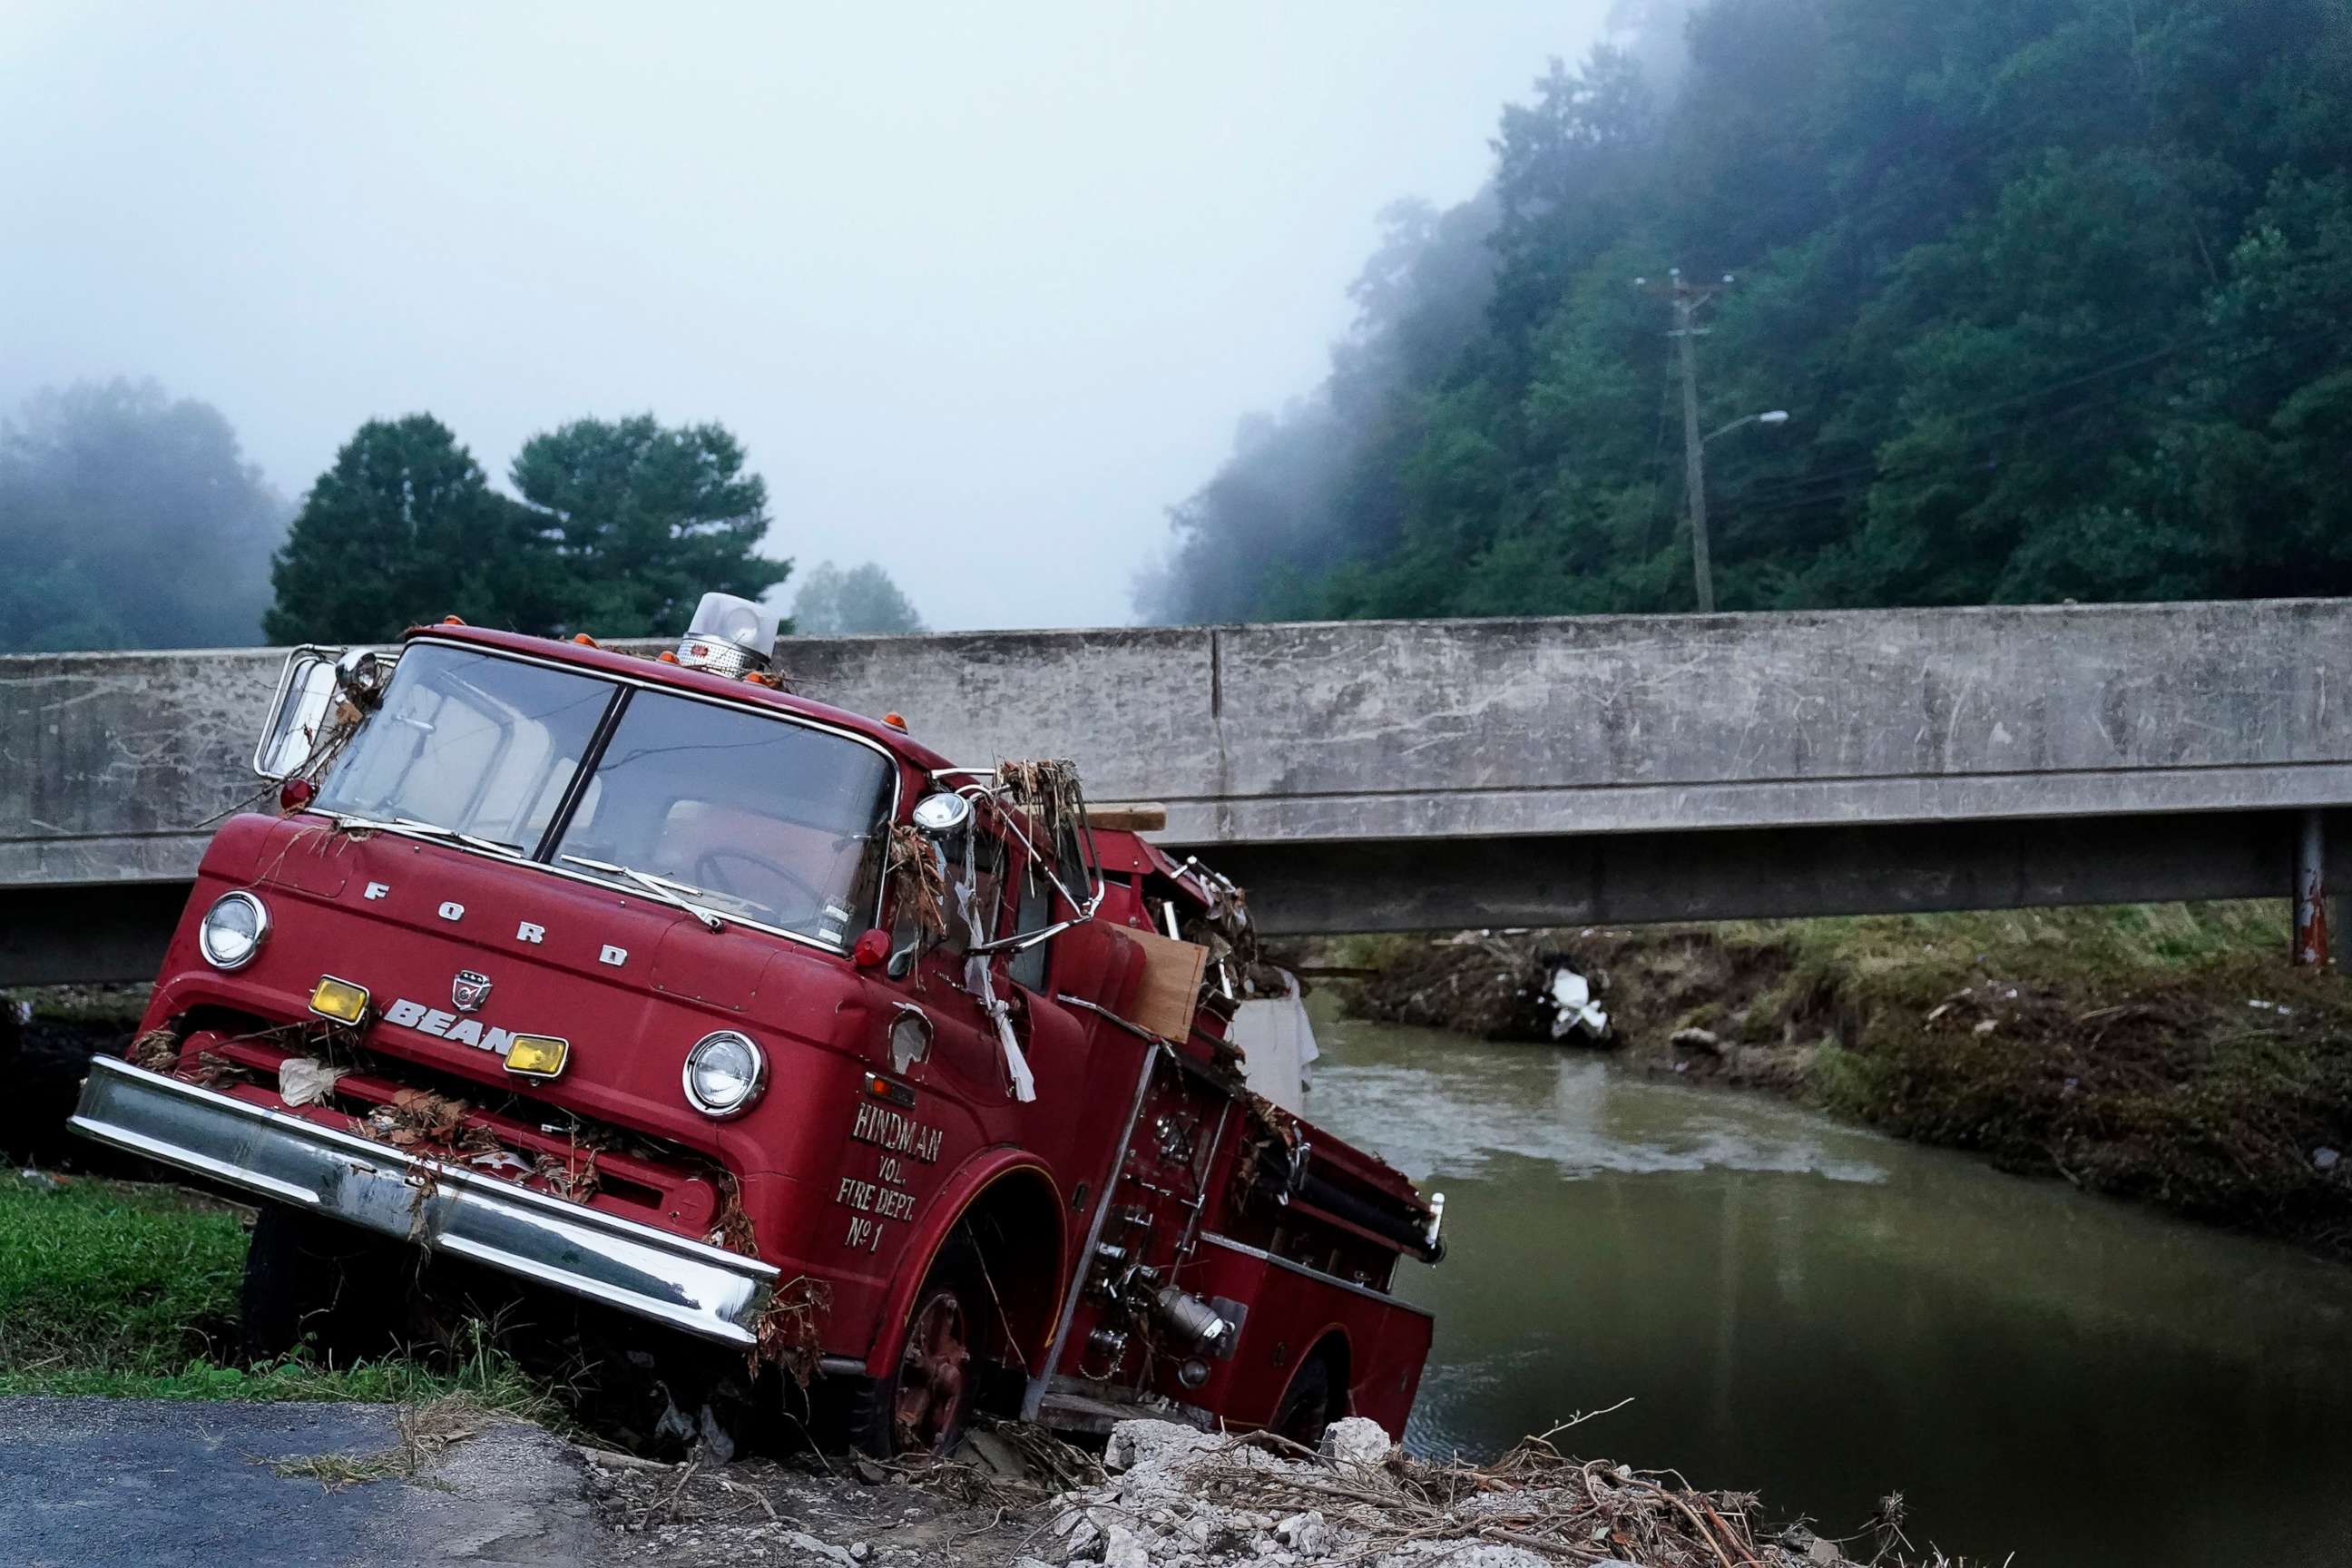 PHOTO: A fire truck is seen hangin over the edge of the water propped against a bridge, Aug. 3, 2022, in Hindman, Ky., after massive flooding carried the fire truck towards the water.  